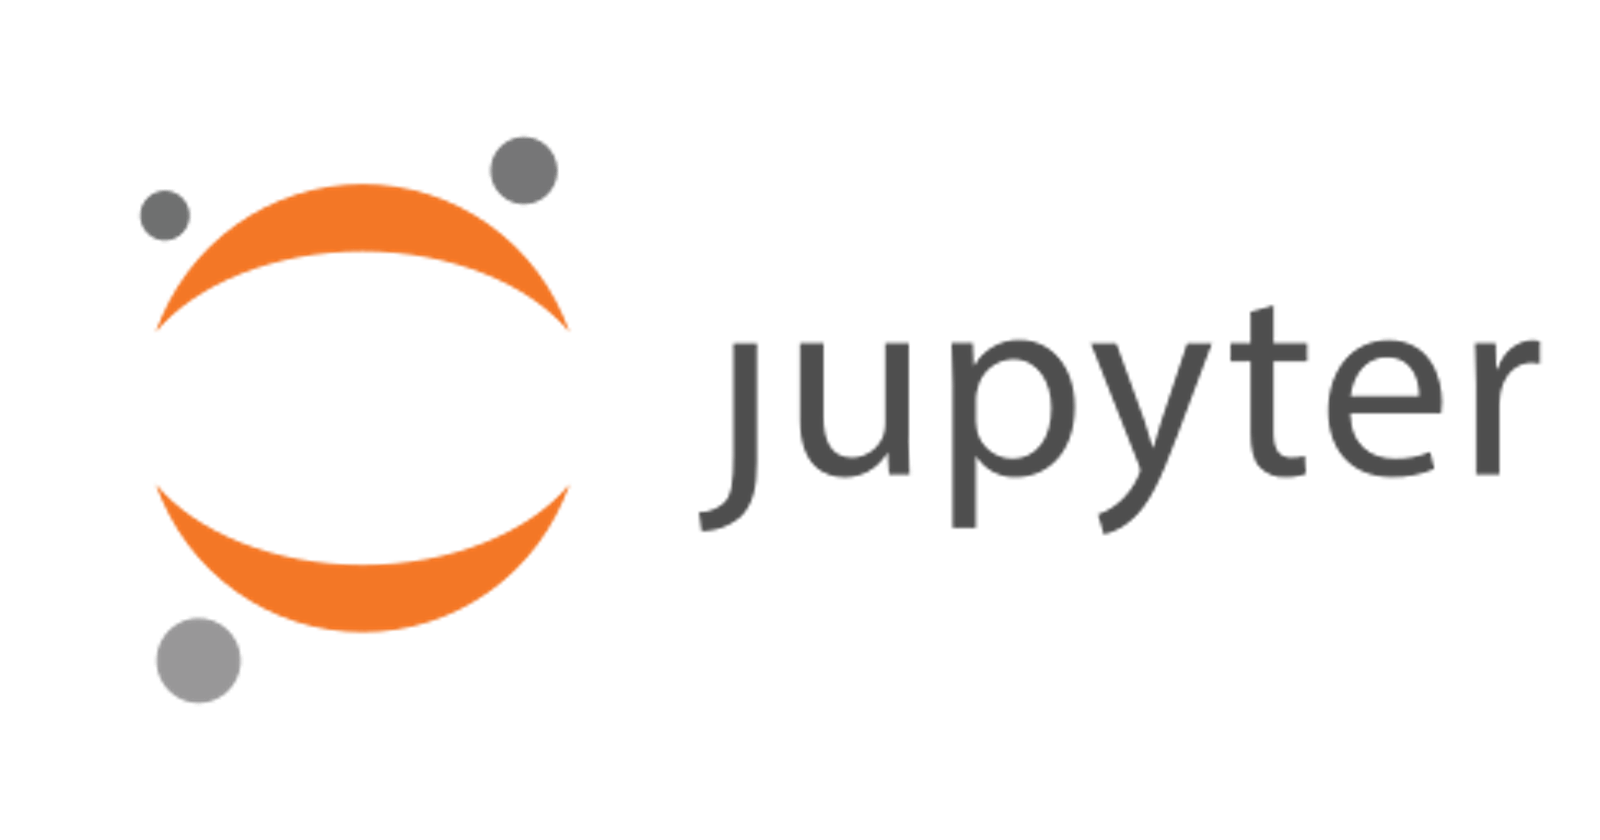 How to Install Jupyter and Create Your First Notebook